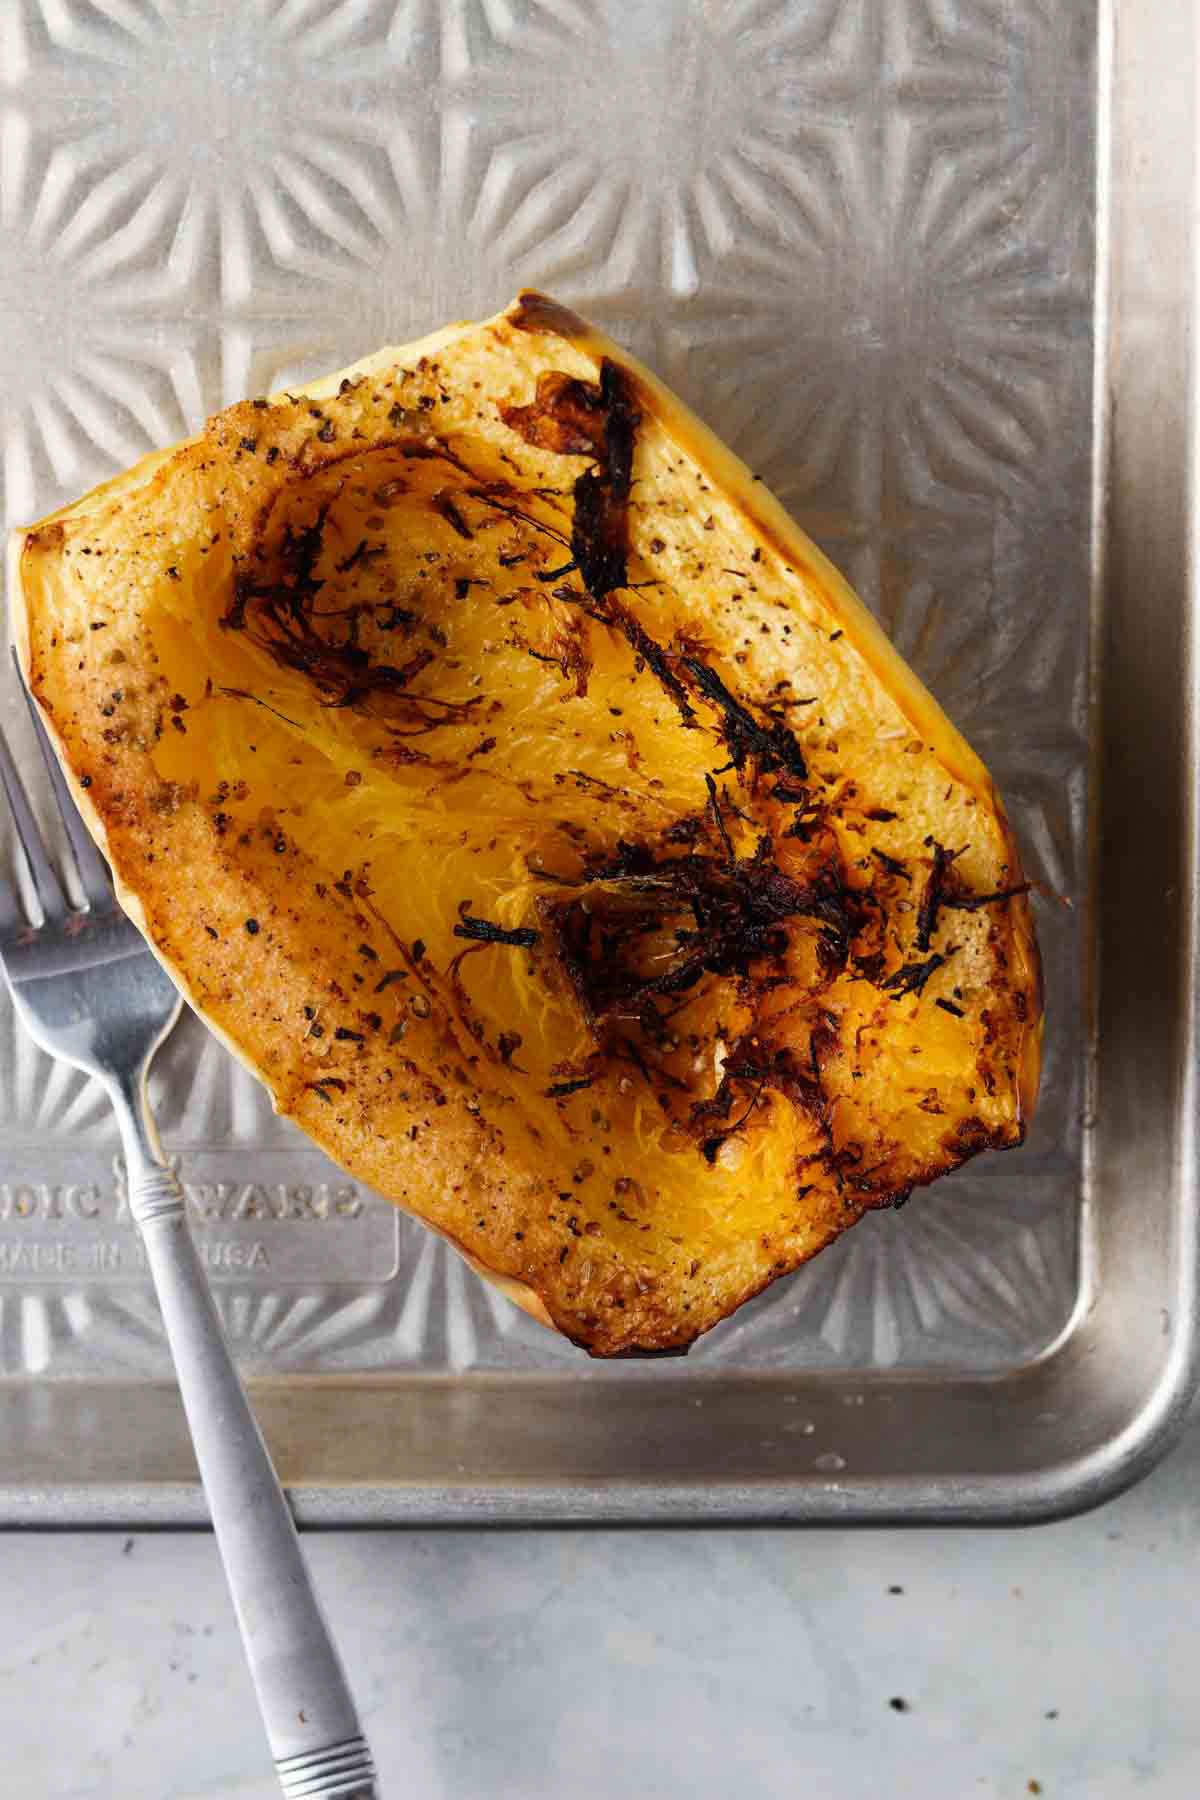 Cooked halved spaghetti squash on a baking tray with a fork next to it. 